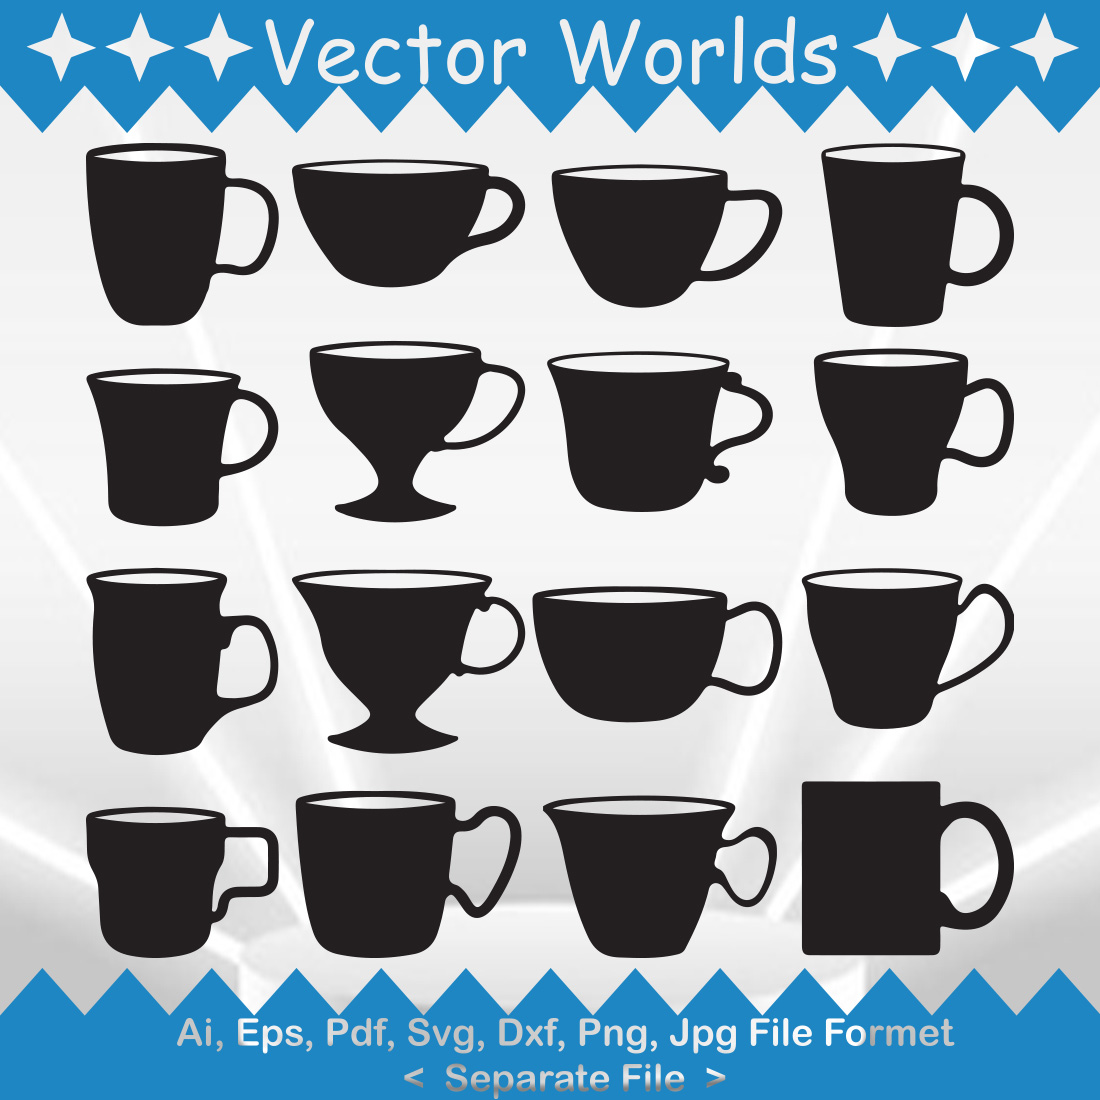 Collection of amazing vector image of coffee mug silhouettes